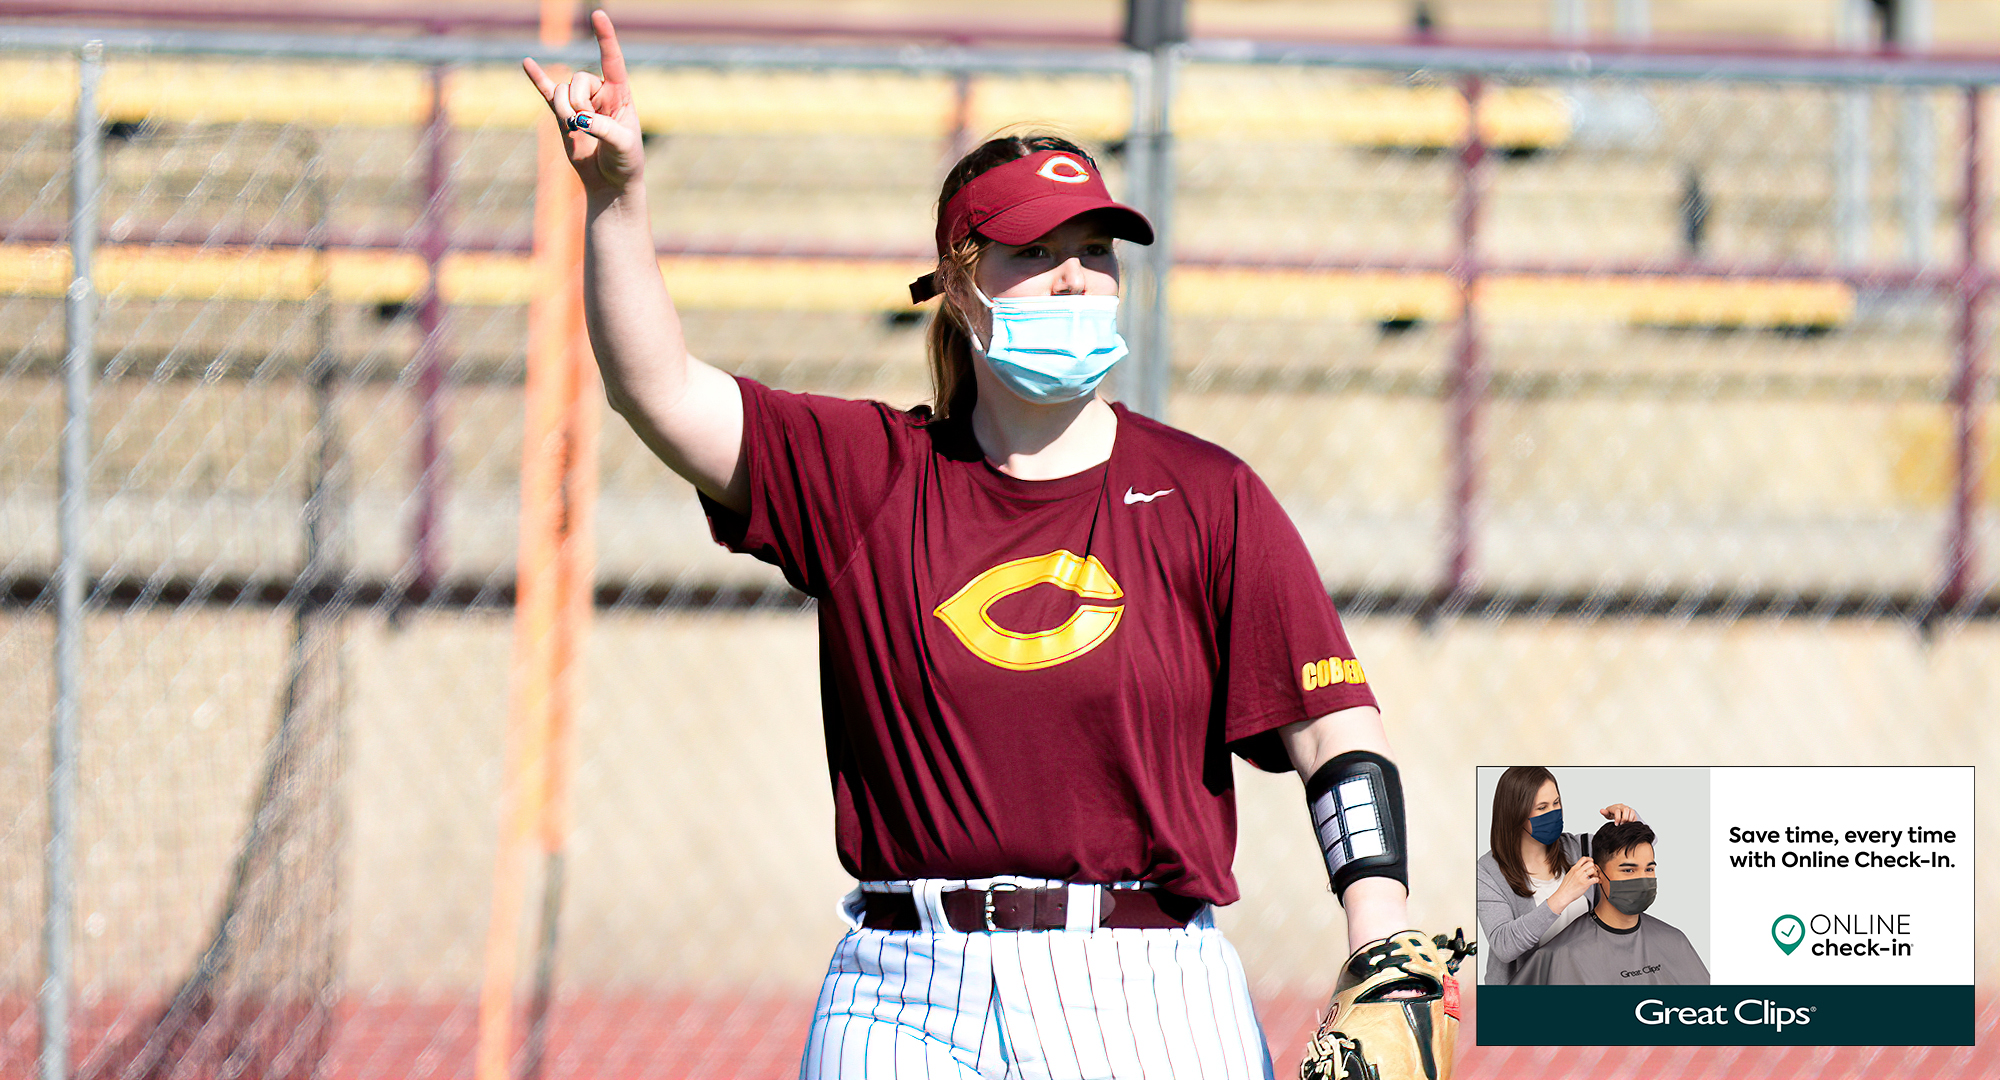 Senior Taylor Erholtz had a double in each of the Cobbers' two games with Wis.-Superior. She was the only CC player with a hit in each of the 5-1 decisions.